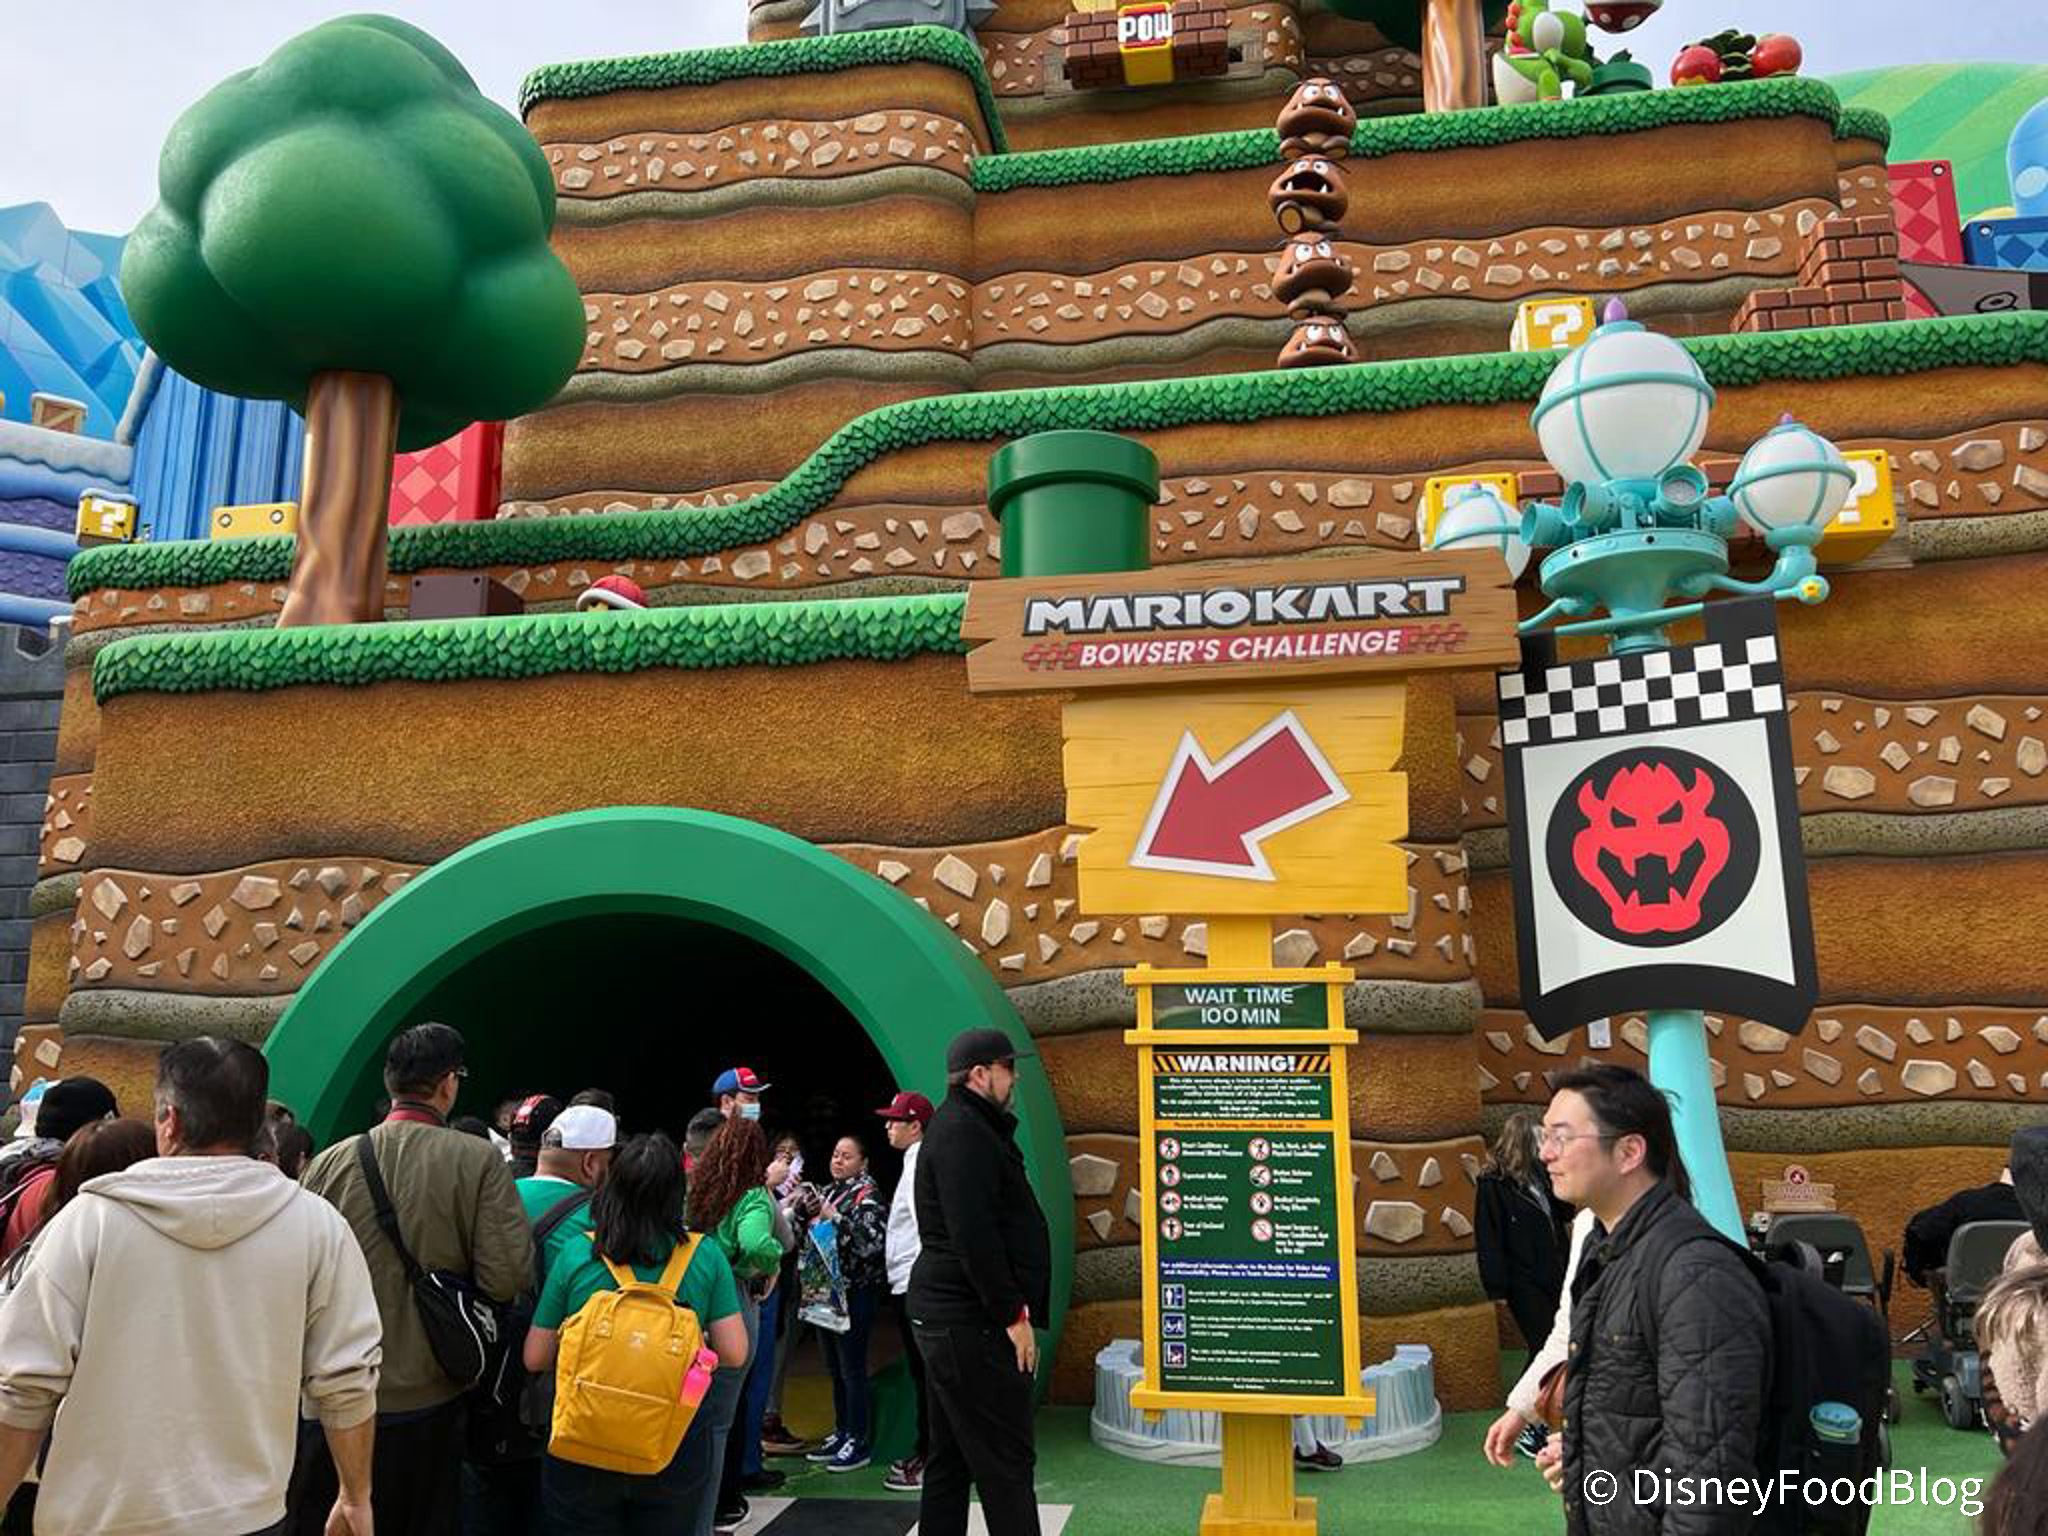 PHOTOS, VIDEO: Full Tour of Mario Kart: Bowser's Challenge, Ride Both With  and Without AR at Universal Studios Hollywood - WDW News Today